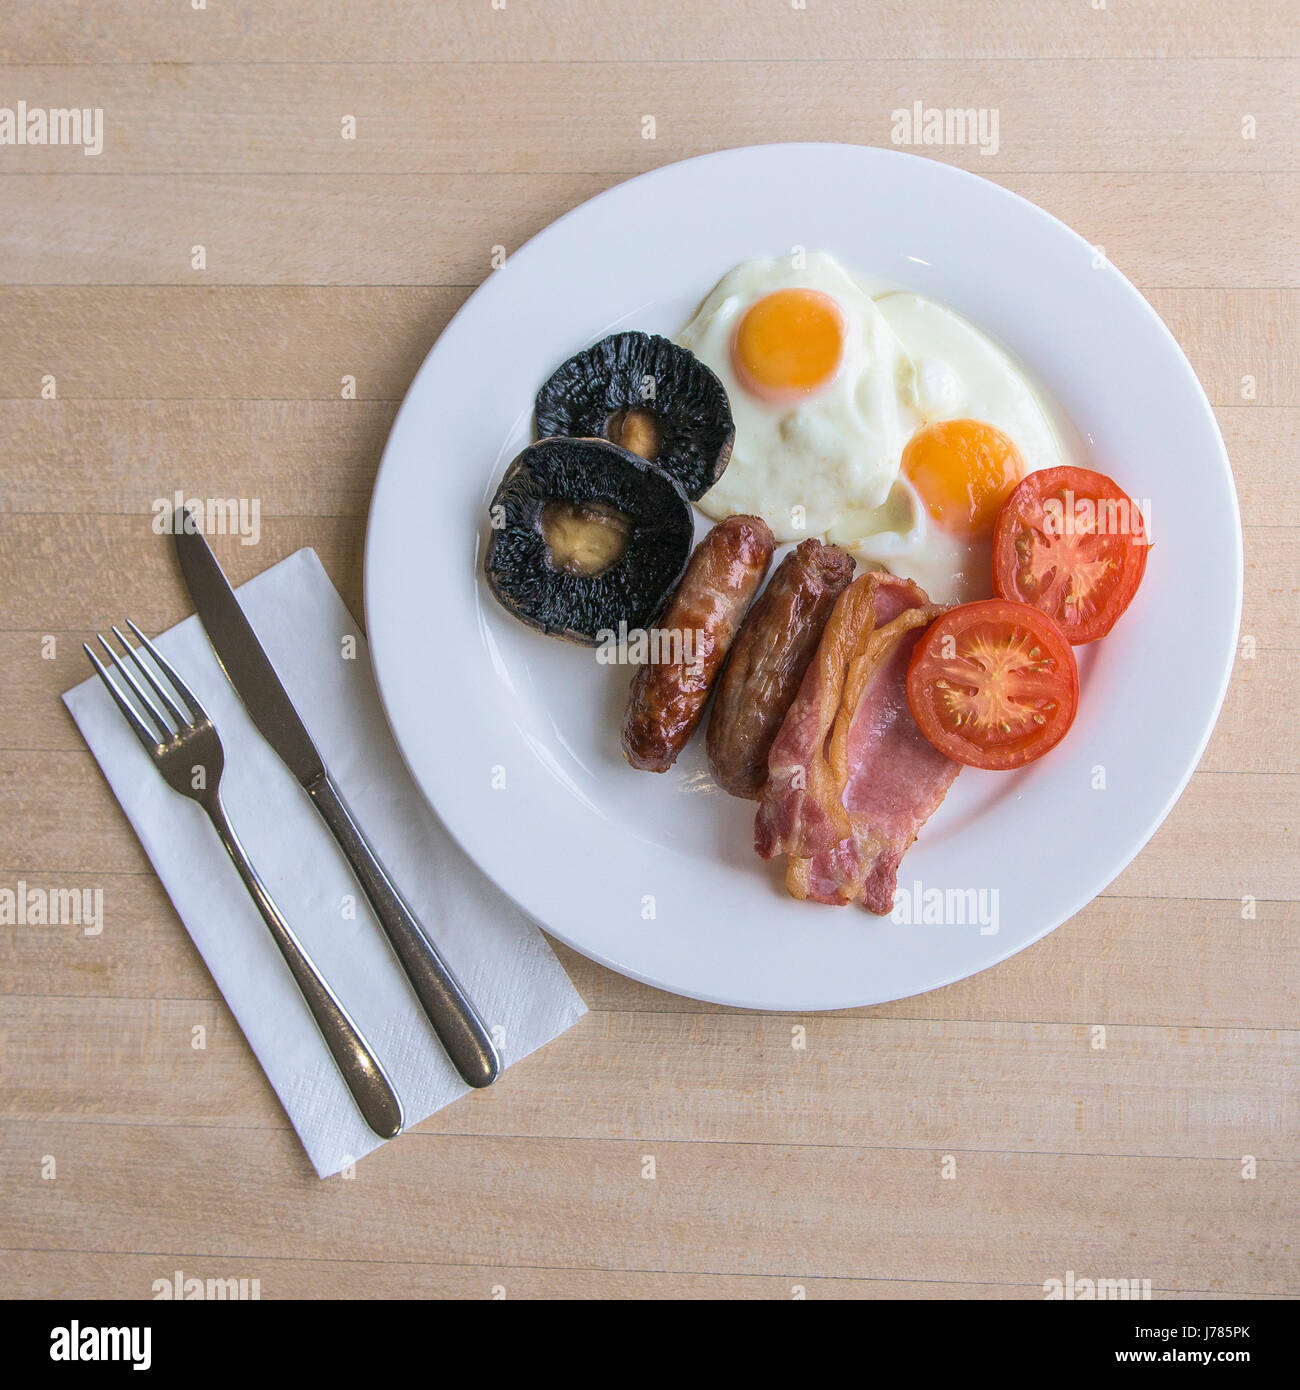 An overhead view of a full English breakfast; Food; Morning meal; Fry up; Calories; Toast; Eggs; Bacon; Sausages; Fried bread; Field mushrooms; Stock Photo